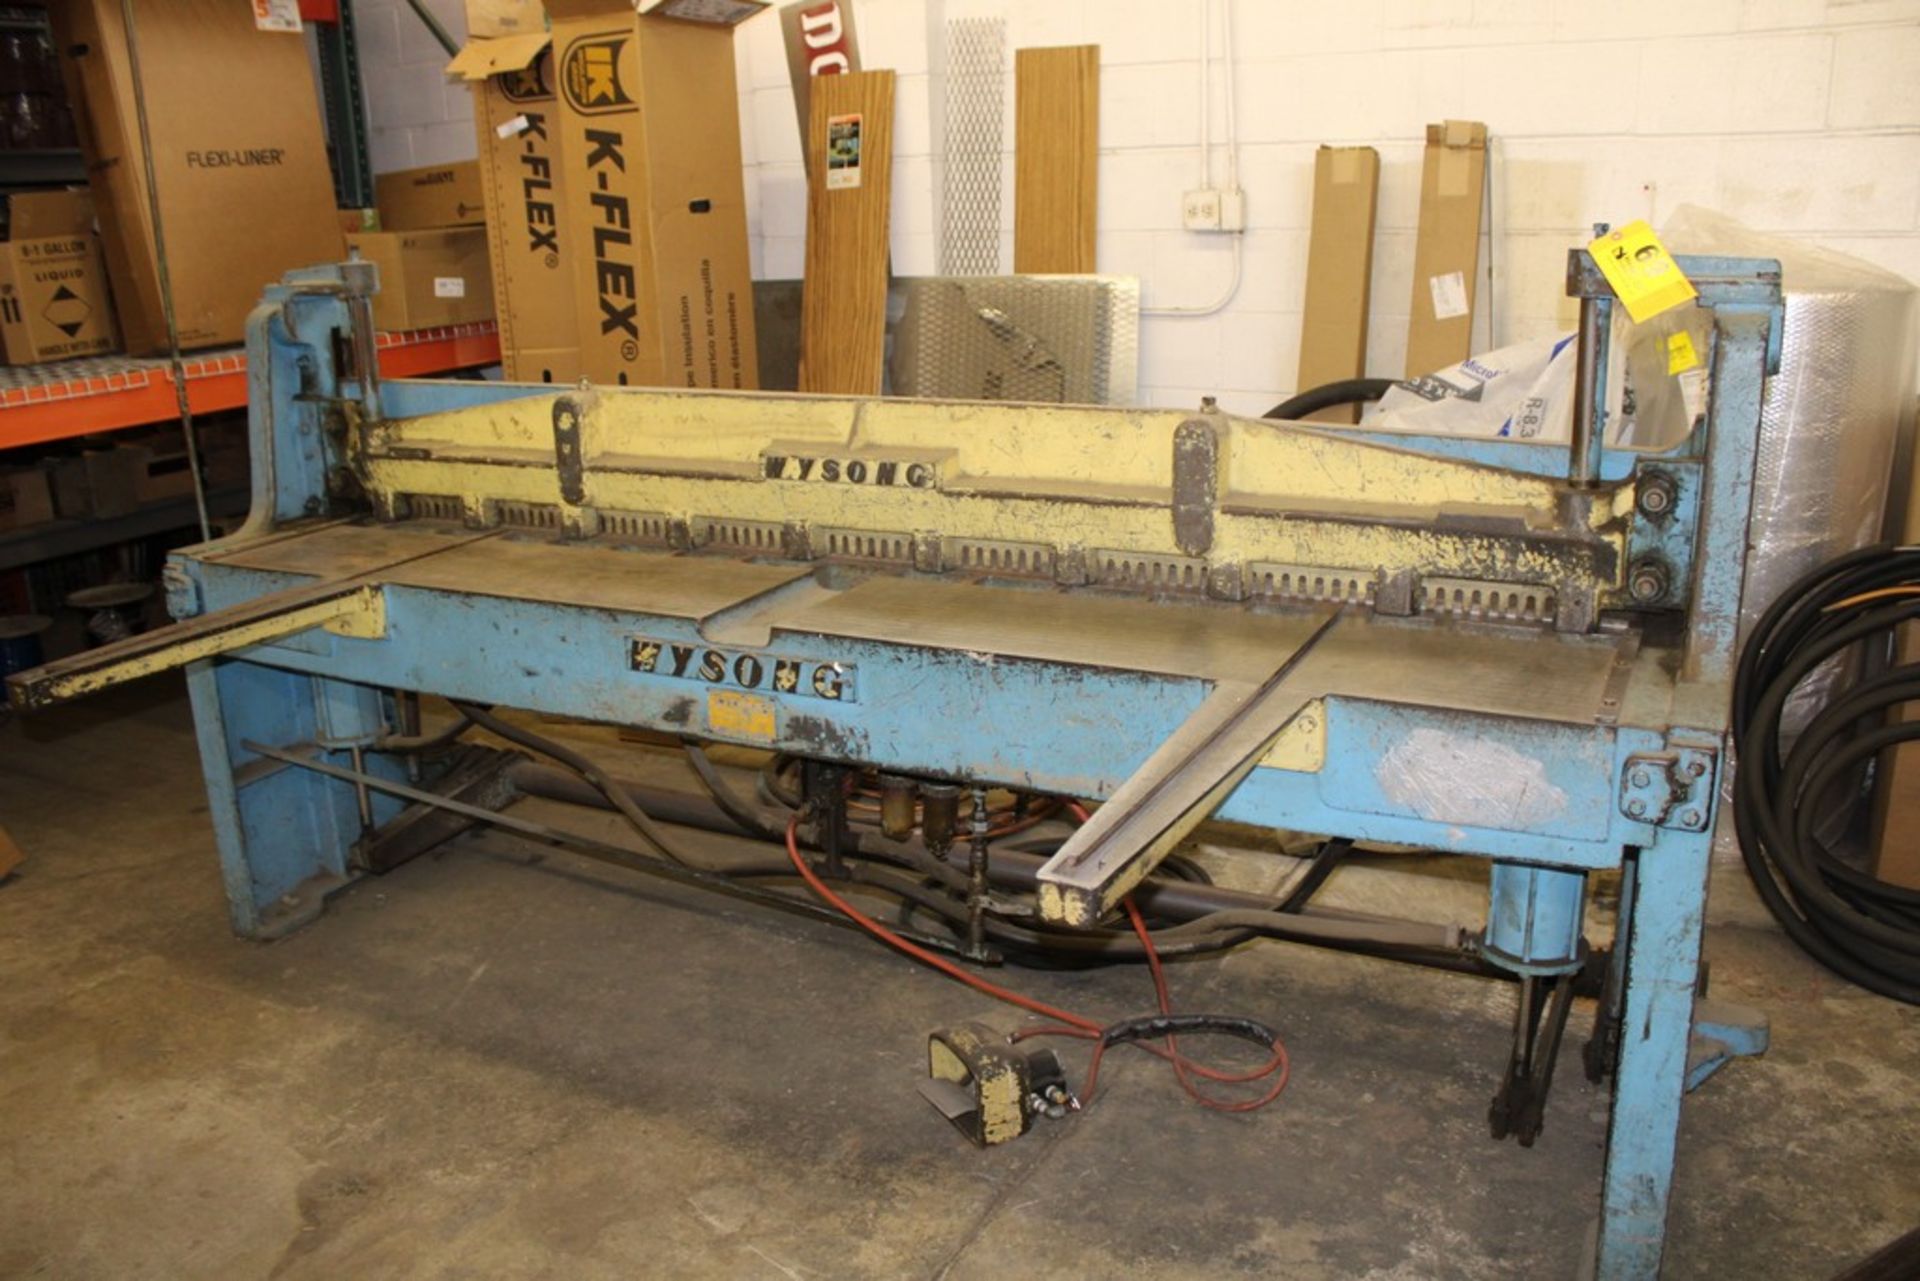 WYSONG MODEL A96 18GA. 8FT PNEUMATIC SHEAR, S/N PA5-164, WITH BACK GAUGE, FOOT PEDAL CONTROL